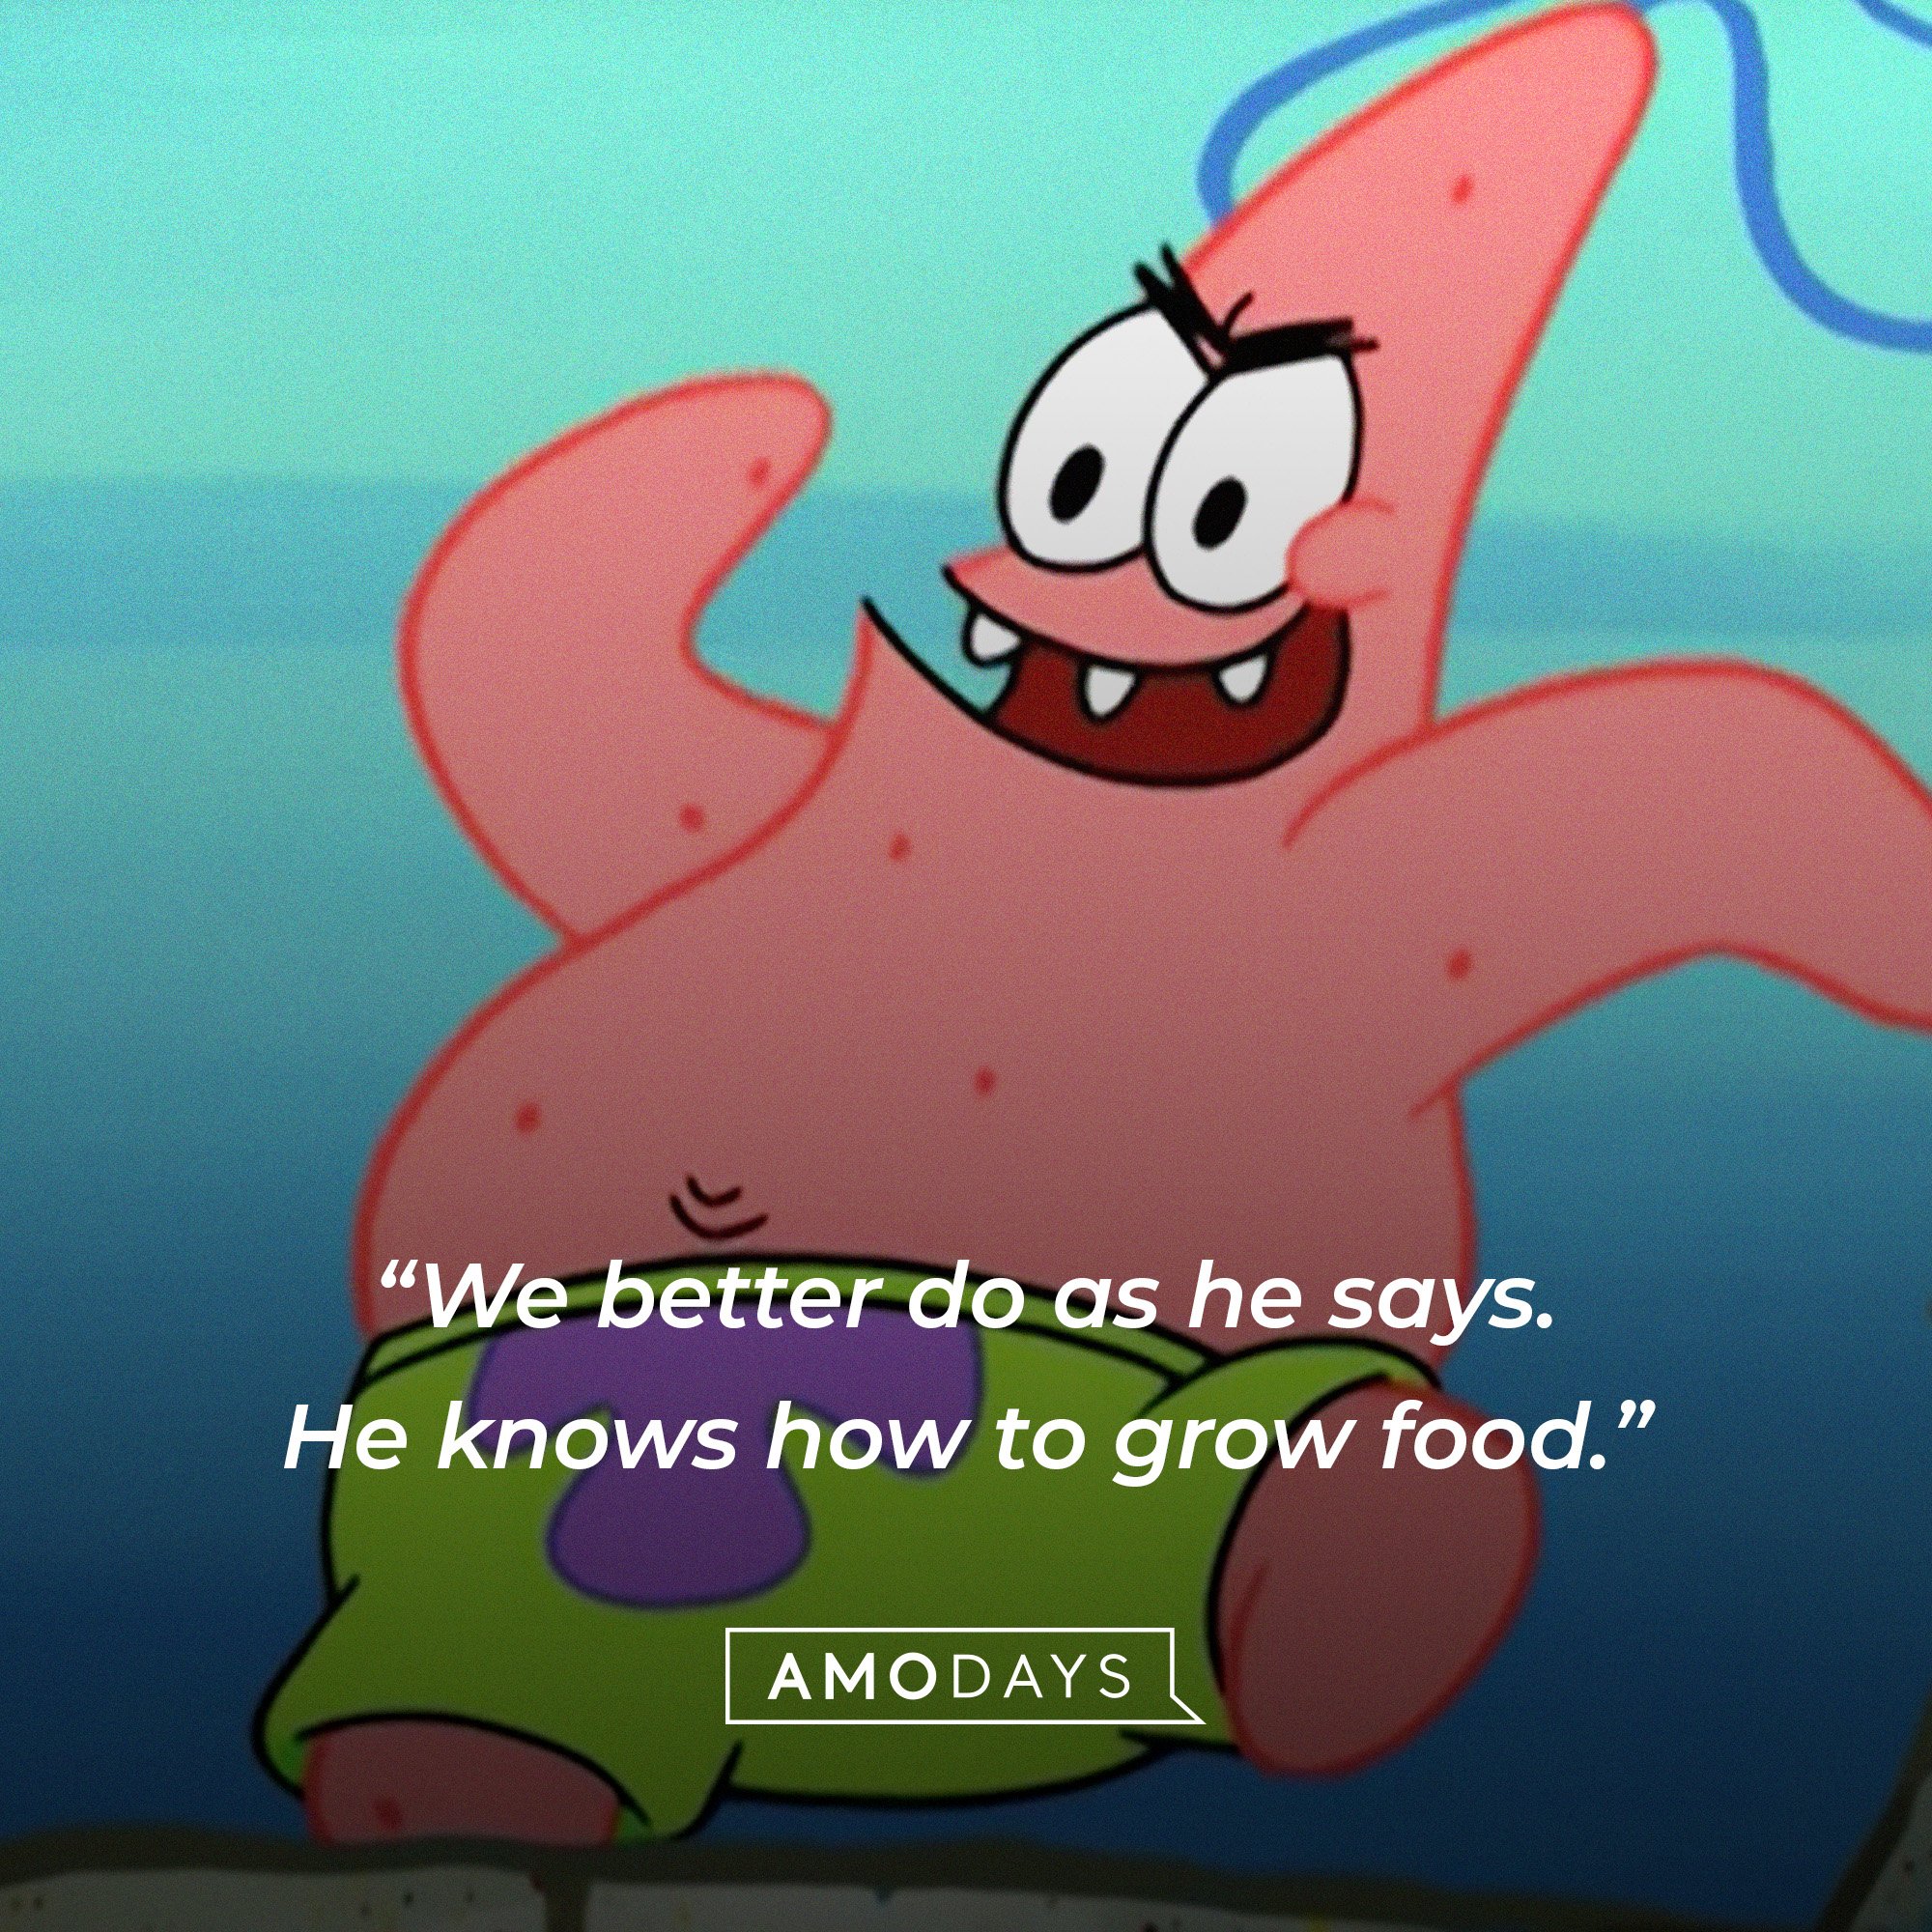 Patrick Star’s quote: “We better do as he says. He knows how to grow food.” | Image: AmoDays